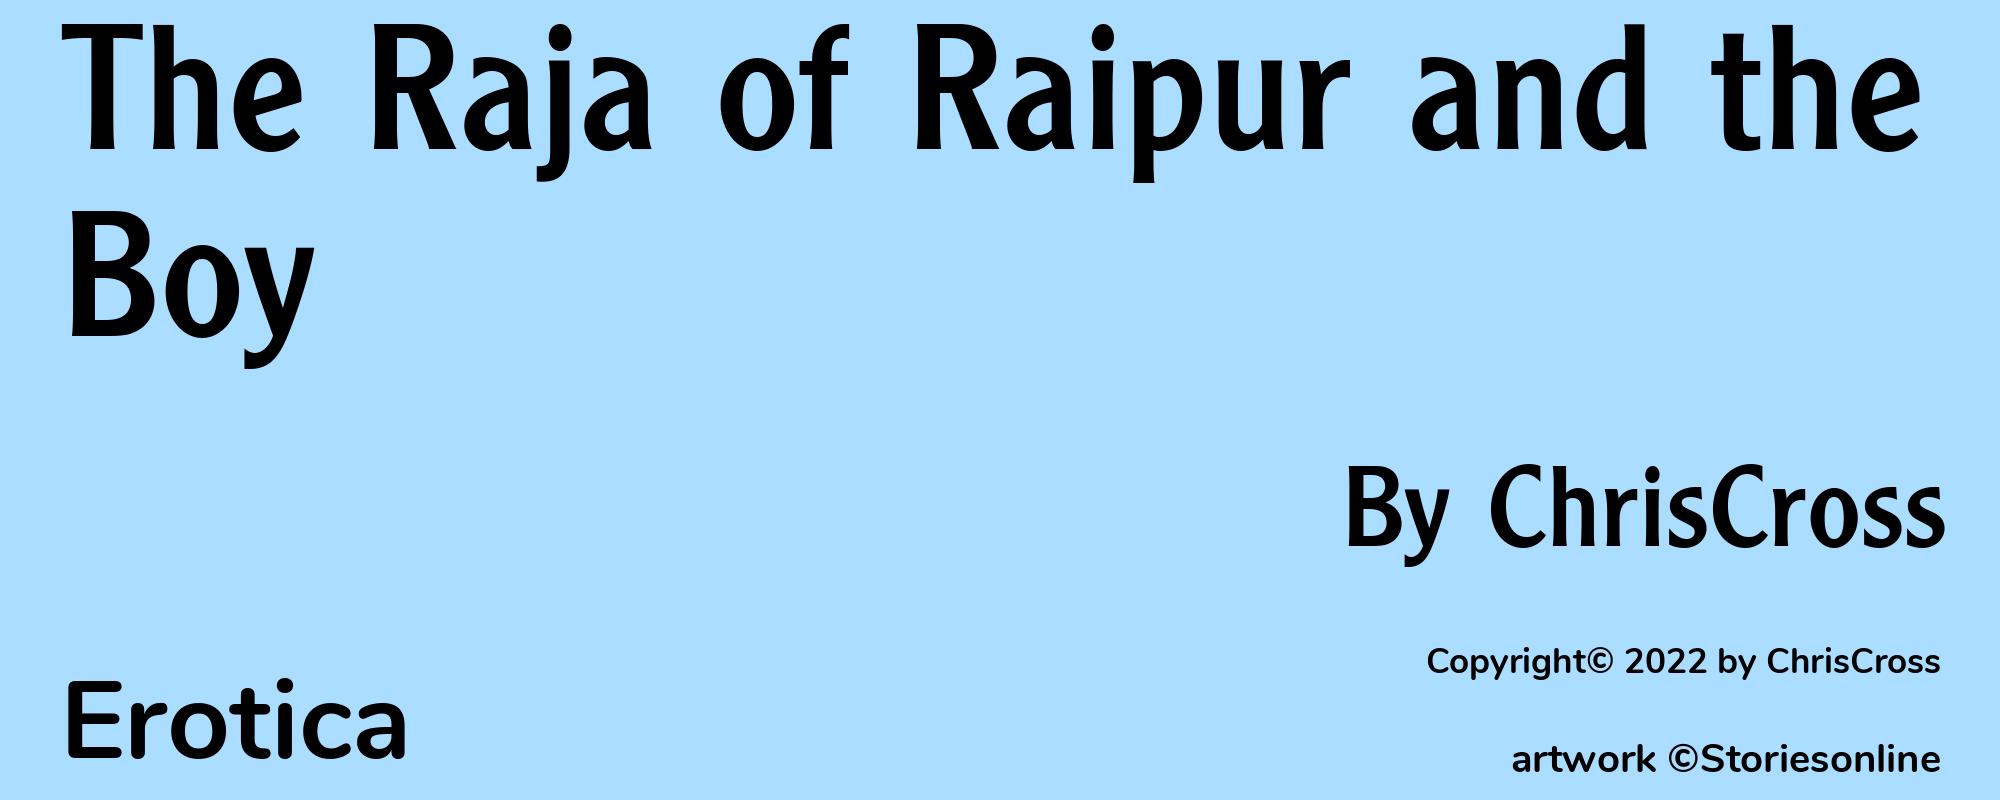 The Raja of Raipur and the Boy - Cover